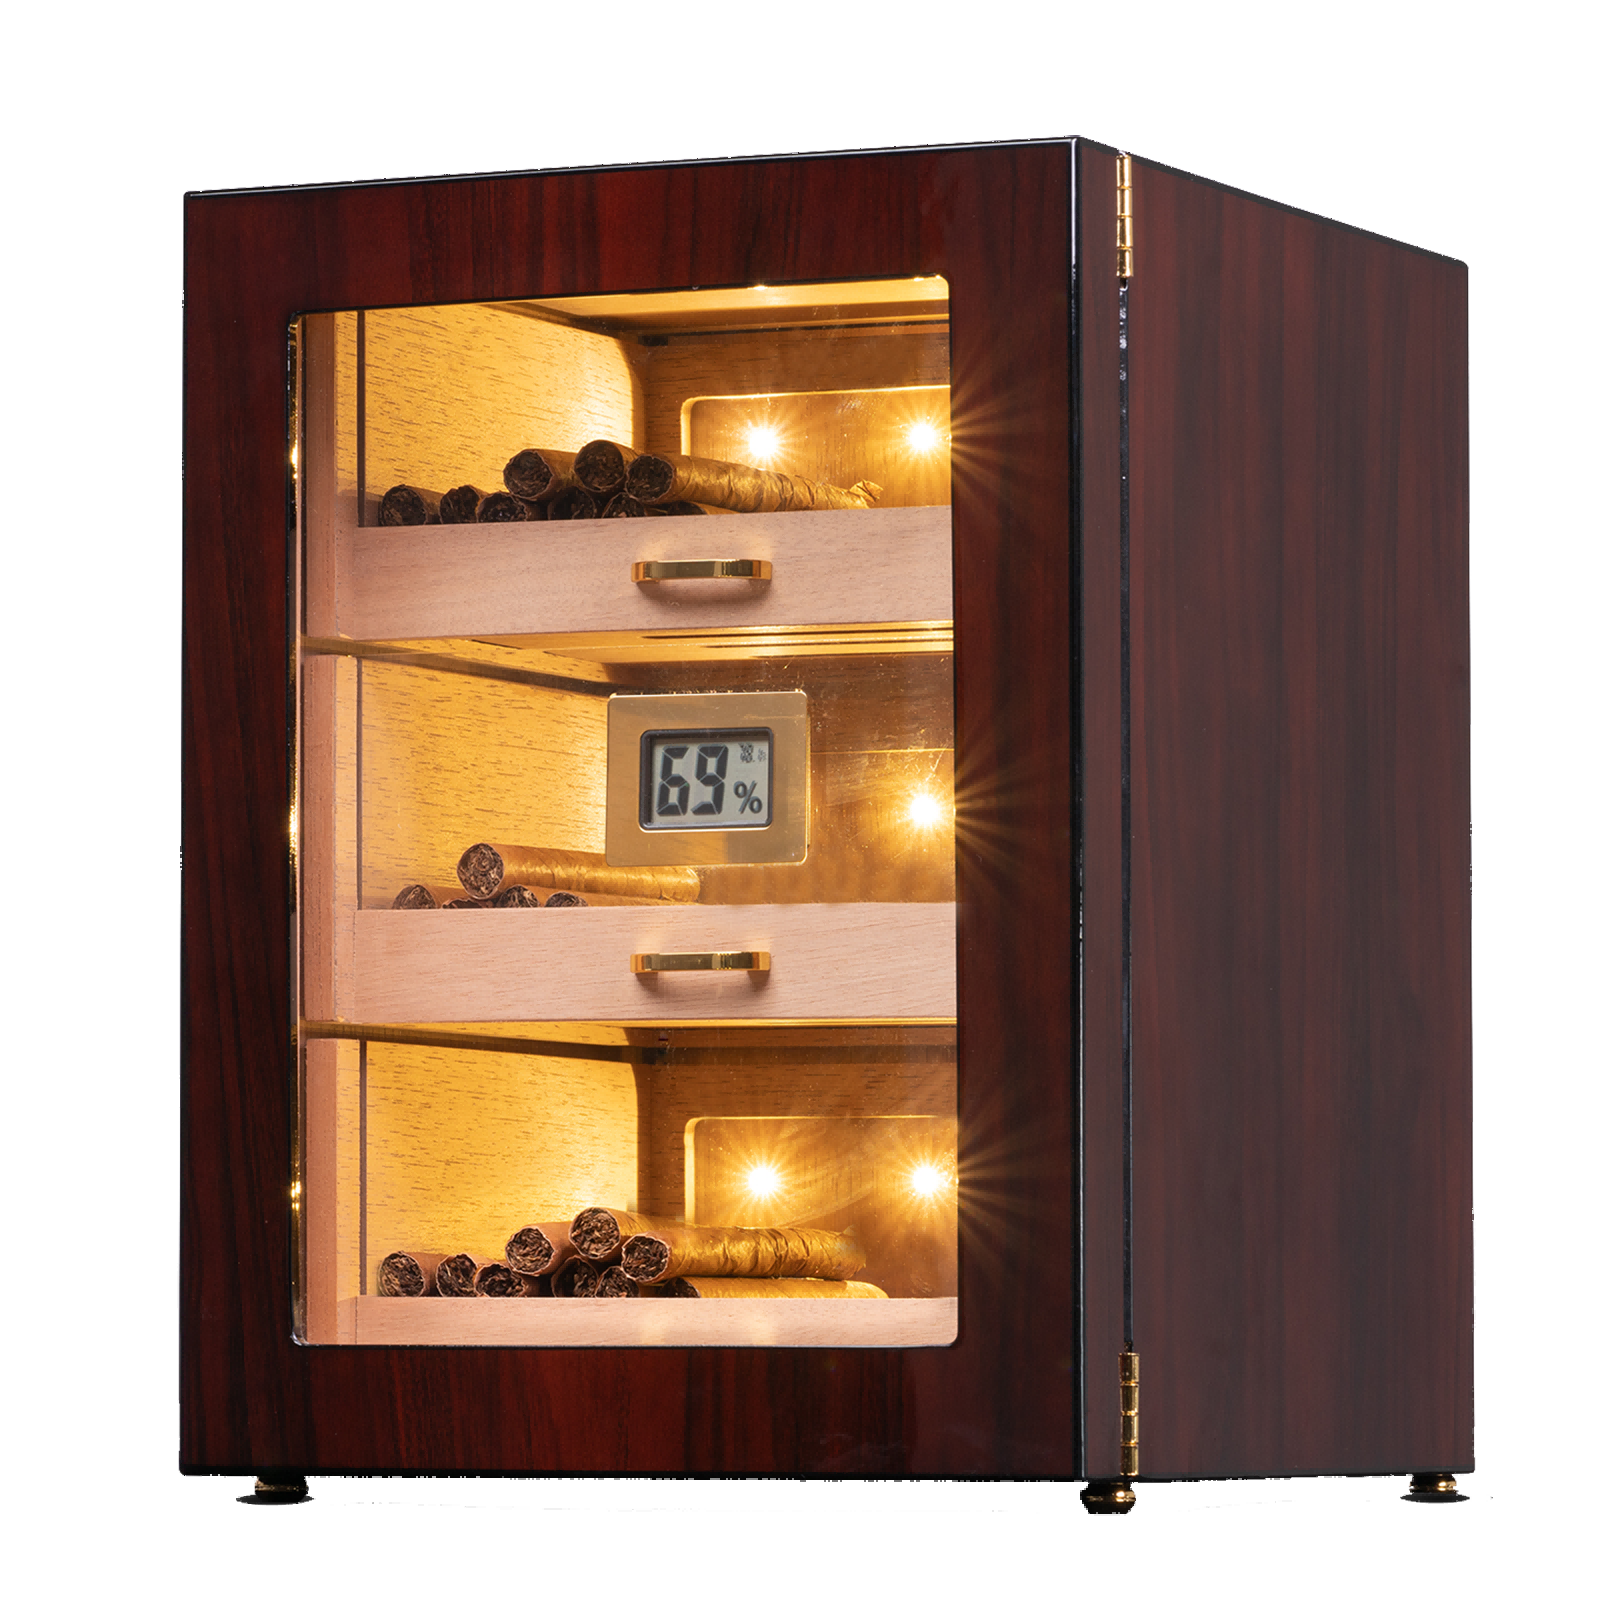 Woodronic Led Lighted Cigar Humidor Cabinet With Digital Hygrometer For 100 To 150 Cigars Spanish Cedar Lining 3 Larger Drawers And 2 Humidifiers